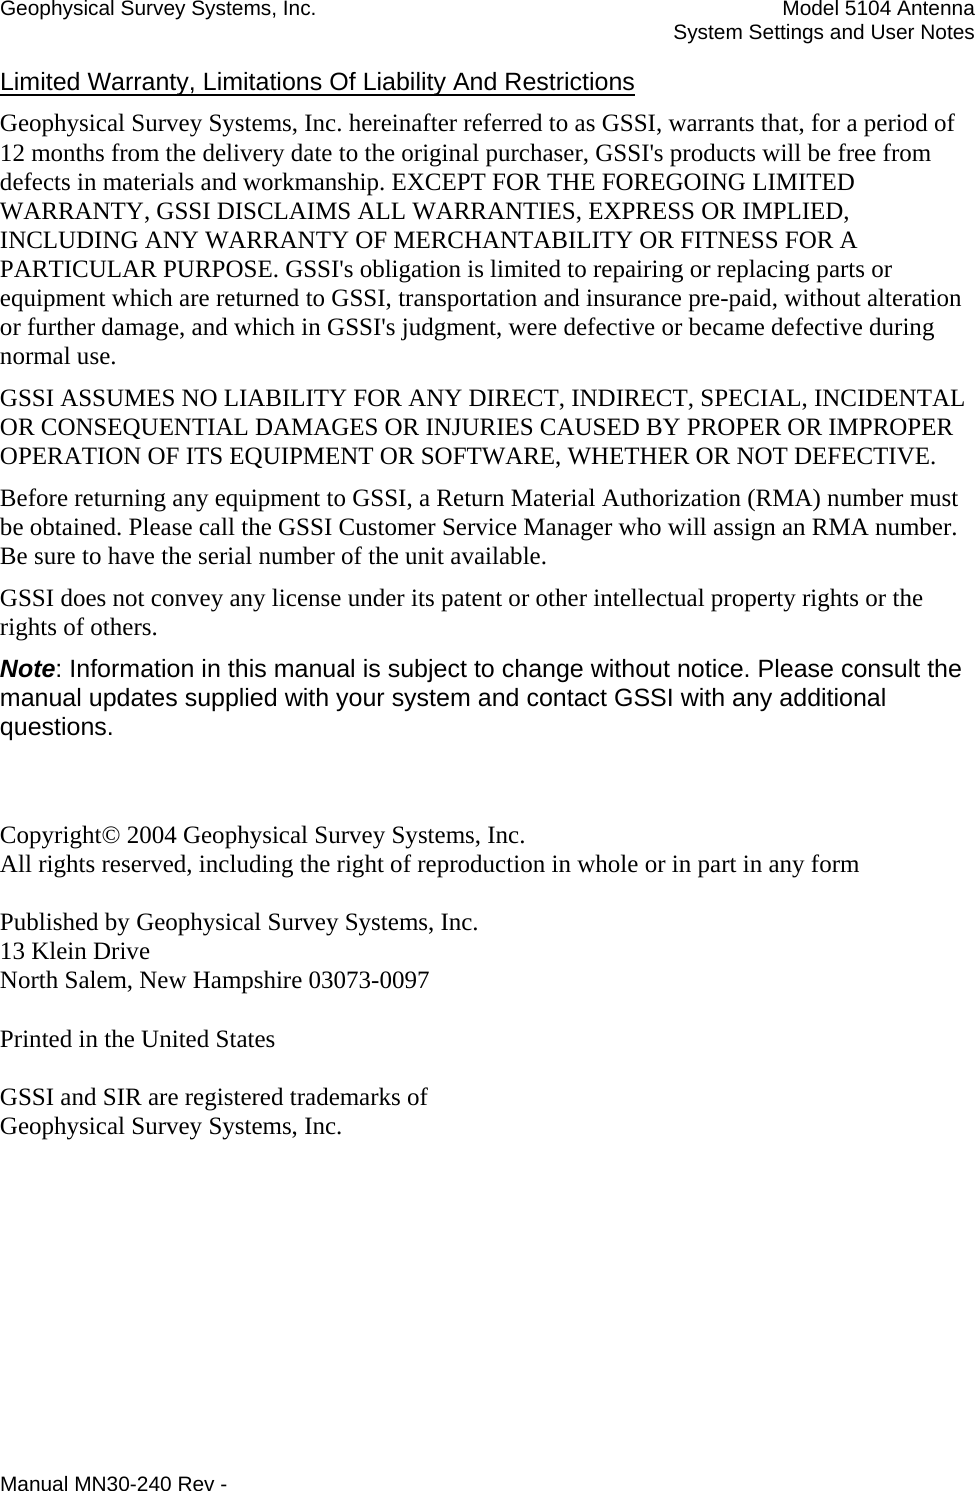 Geophysical Survey Systems, Inc.    Model 5104 Antenna     System Settings and User Notes  Limited Warranty, Limitations Of Liability And Restrictions Geophysical Survey Systems, Inc. hereinafter referred to as GSSI, warrants that, for a period of 12 months from the delivery date to the original purchaser, GSSI&apos;s products will be free from defects in materials and workmanship. EXCEPT FOR THE FOREGOING LIMITED WARRANTY, GSSI DISCLAIMS ALL WARRANTIES, EXPRESS OR IMPLIED, INCLUDING ANY WARRANTY OF MERCHANTABILITY OR FITNESS FOR A PARTICULAR PURPOSE. GSSI&apos;s obligation is limited to repairing or replacing parts or equipment which are returned to GSSI, transportation and insurance pre-paid, without alteration or further damage, and which in GSSI&apos;s judgment, were defective or became defective during normal use. GSSI ASSUMES NO LIABILITY FOR ANY DIRECT, INDIRECT, SPECIAL, INCIDENTAL OR CONSEQUENTIAL DAMAGES OR INJURIES CAUSED BY PROPER OR IMPROPER OPERATION OF ITS EQUIPMENT OR SOFTWARE, WHETHER OR NOT DEFECTIVE. Before returning any equipment to GSSI, a Return Material Authorization (RMA) number must be obtained. Please call the GSSI Customer Service Manager who will assign an RMA number. Be sure to have the serial number of the unit available. GSSI does not convey any license under its patent or other intellectual property rights or the rights of others. Note: Information in this manual is subject to change without notice. Please consult the manual updates supplied with your system and contact GSSI with any additional questions.   Copyright© 2004 Geophysical Survey Systems, Inc. All rights reserved, including the right of reproduction in whole or in part in any form  Published by Geophysical Survey Systems, Inc. 13 Klein Drive North Salem, New Hampshire 03073-0097  Printed in the United States  GSSI and SIR are registered trademarks of Geophysical Survey Systems, Inc. Manual MN30-240 Rev - 